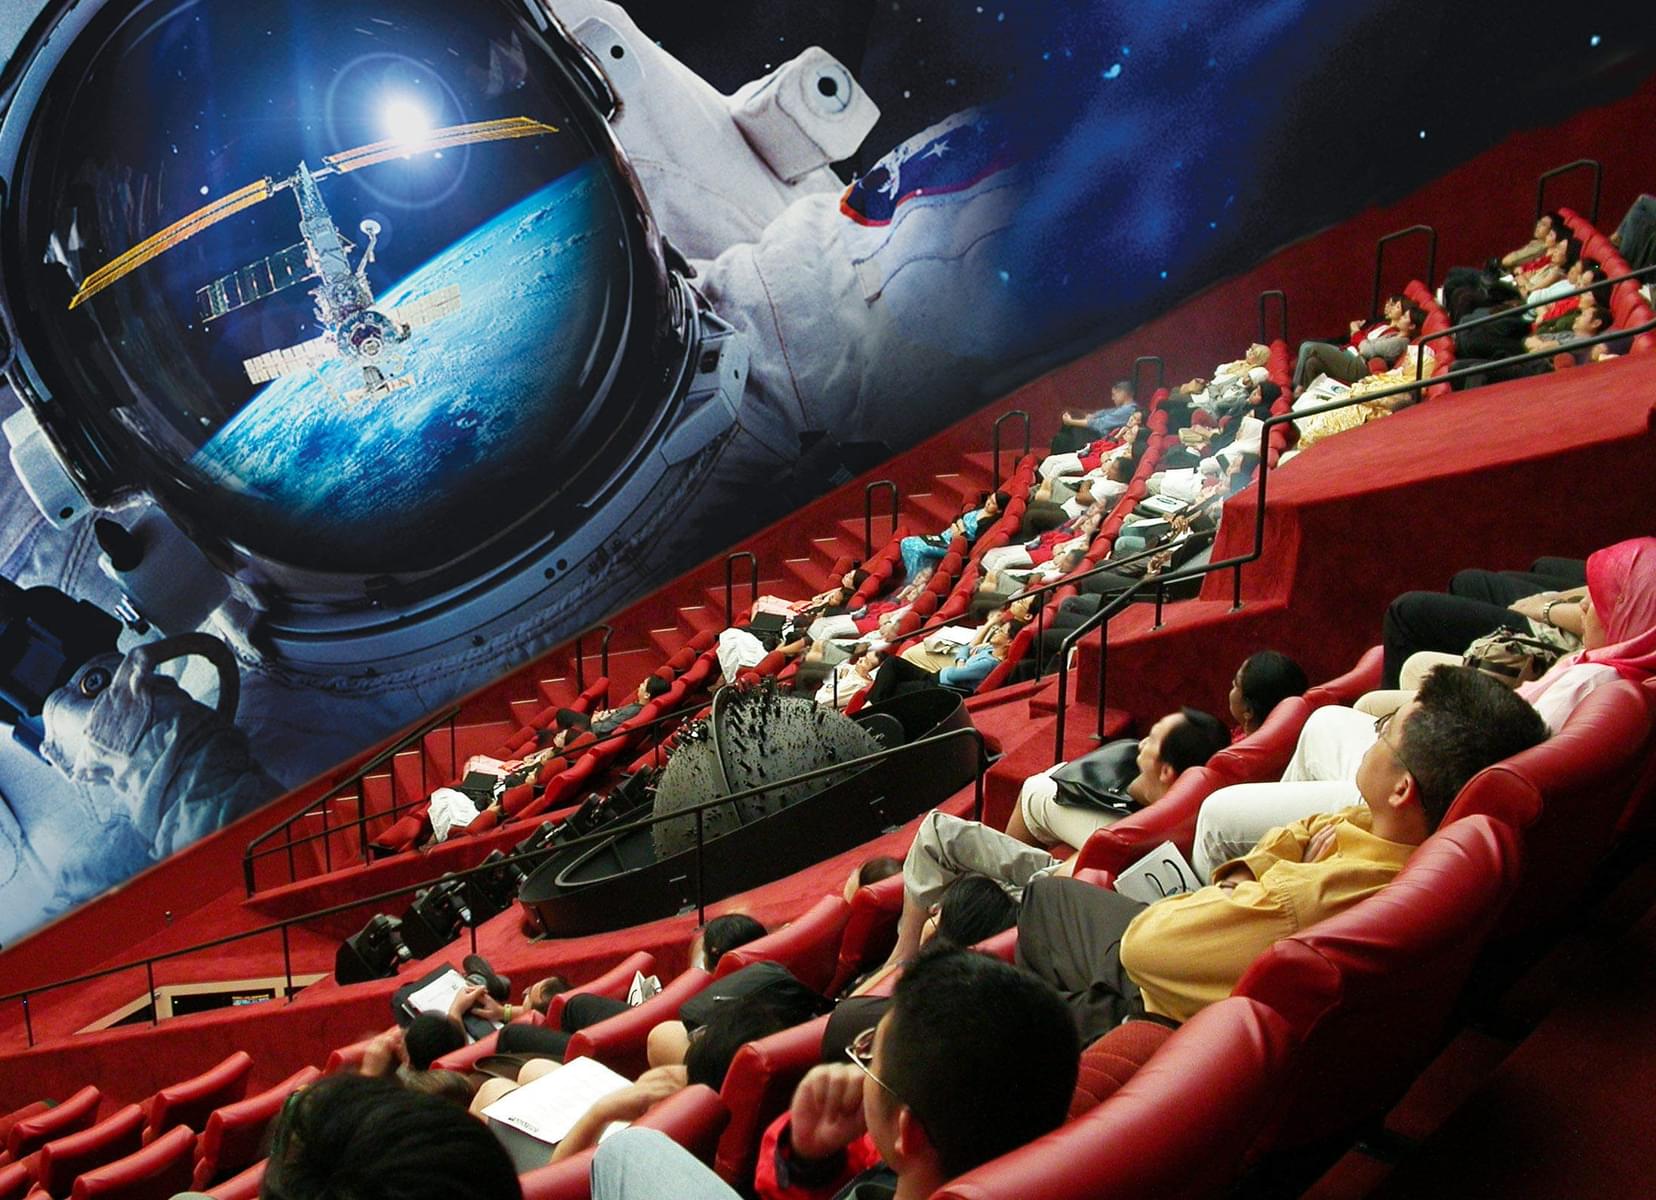 Be amazed by the Digital movies you watch on this stunning Fulldome screen